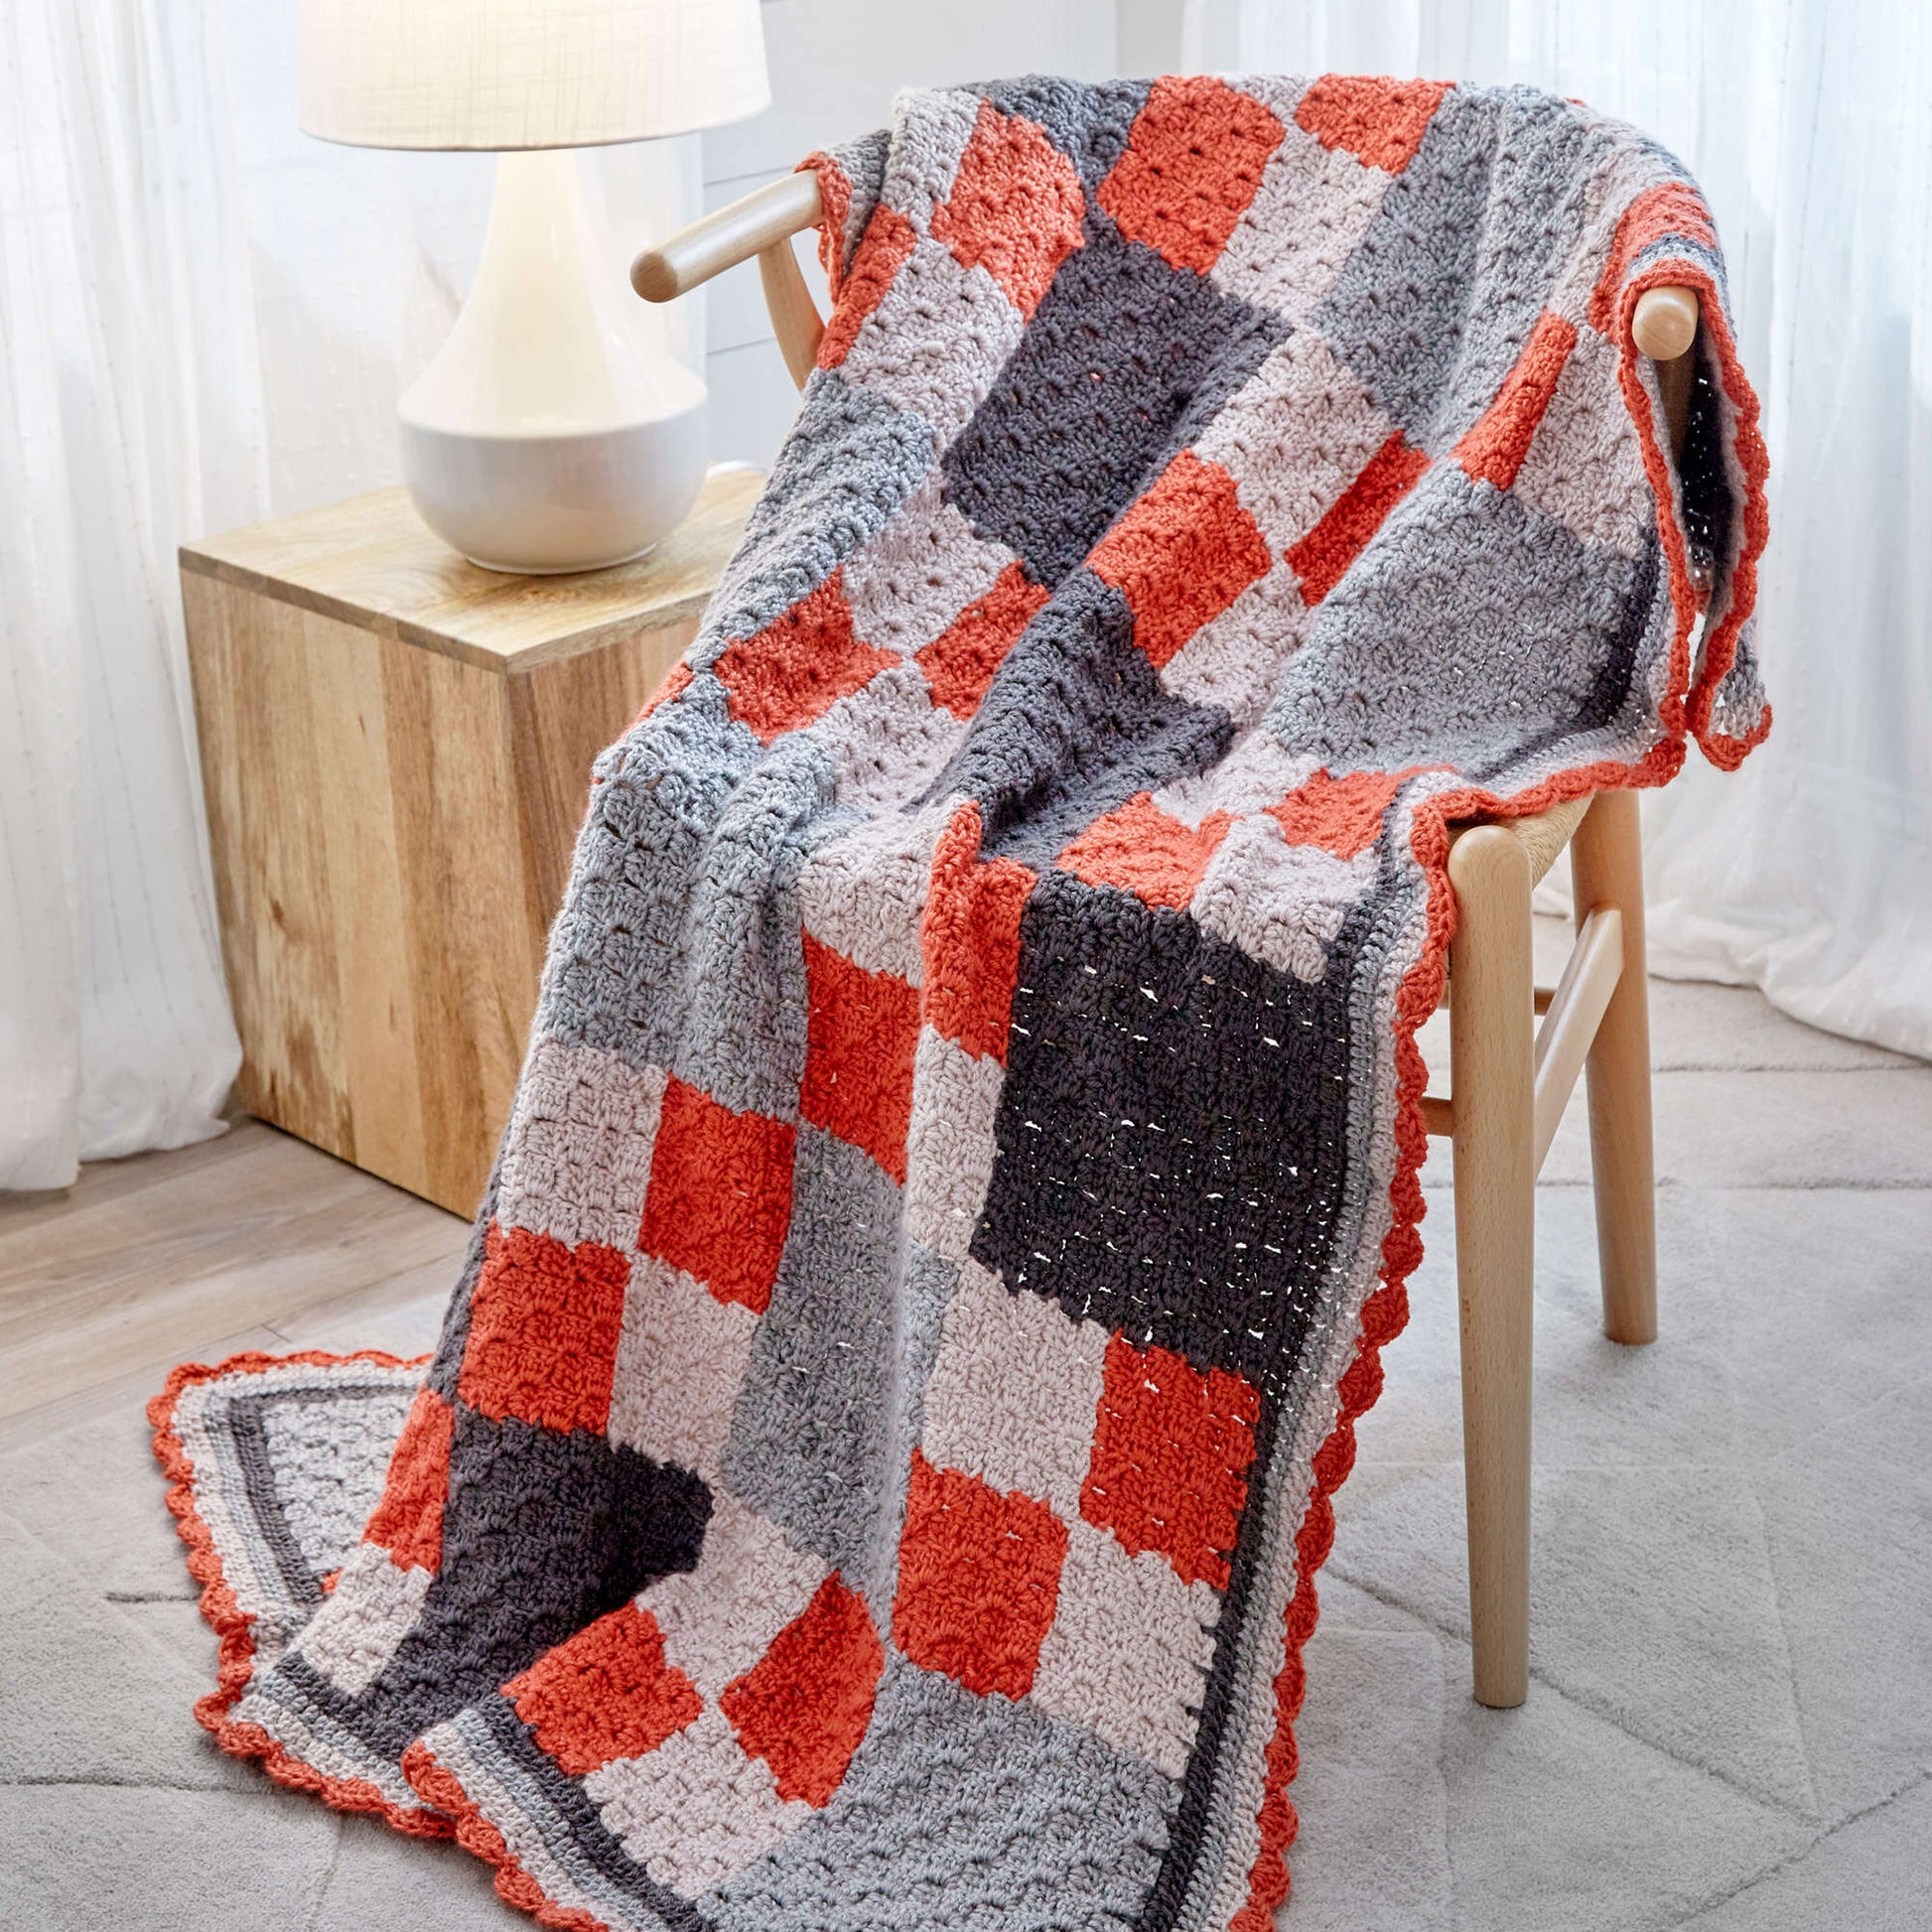 Free Red Heart Crochet Four-Patch Throw Pattern